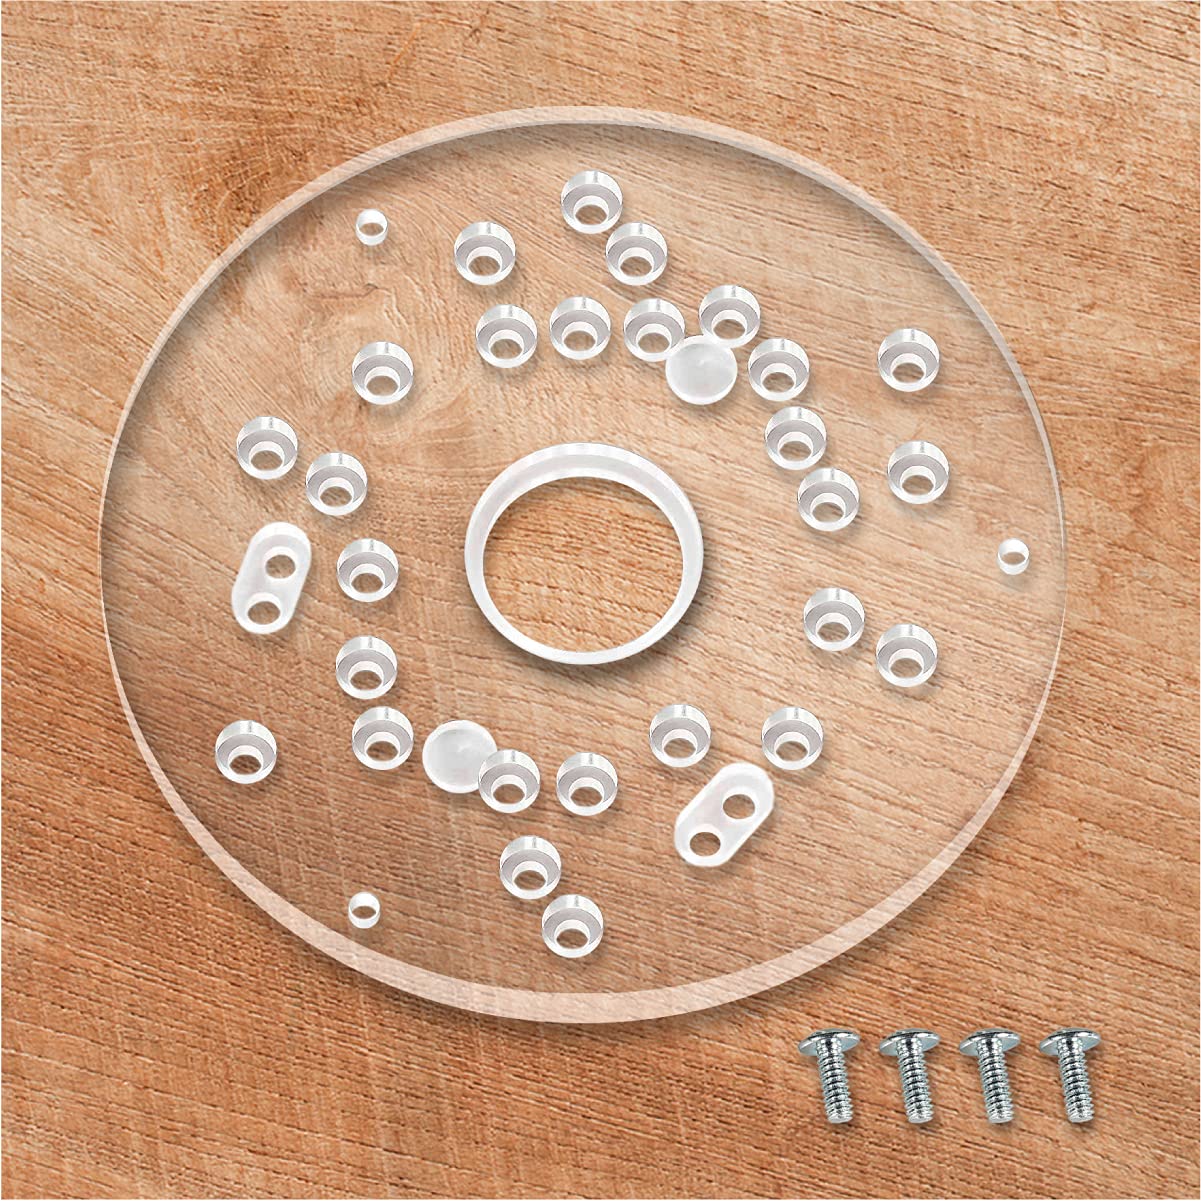 POWERTEC 71381 Dia 5-3/4" Clear Acrylic Offset Router Base Plate with Screws and Multiple Pre Drilled Holes for Trim Routers, Fits Bosch, DeWalt,